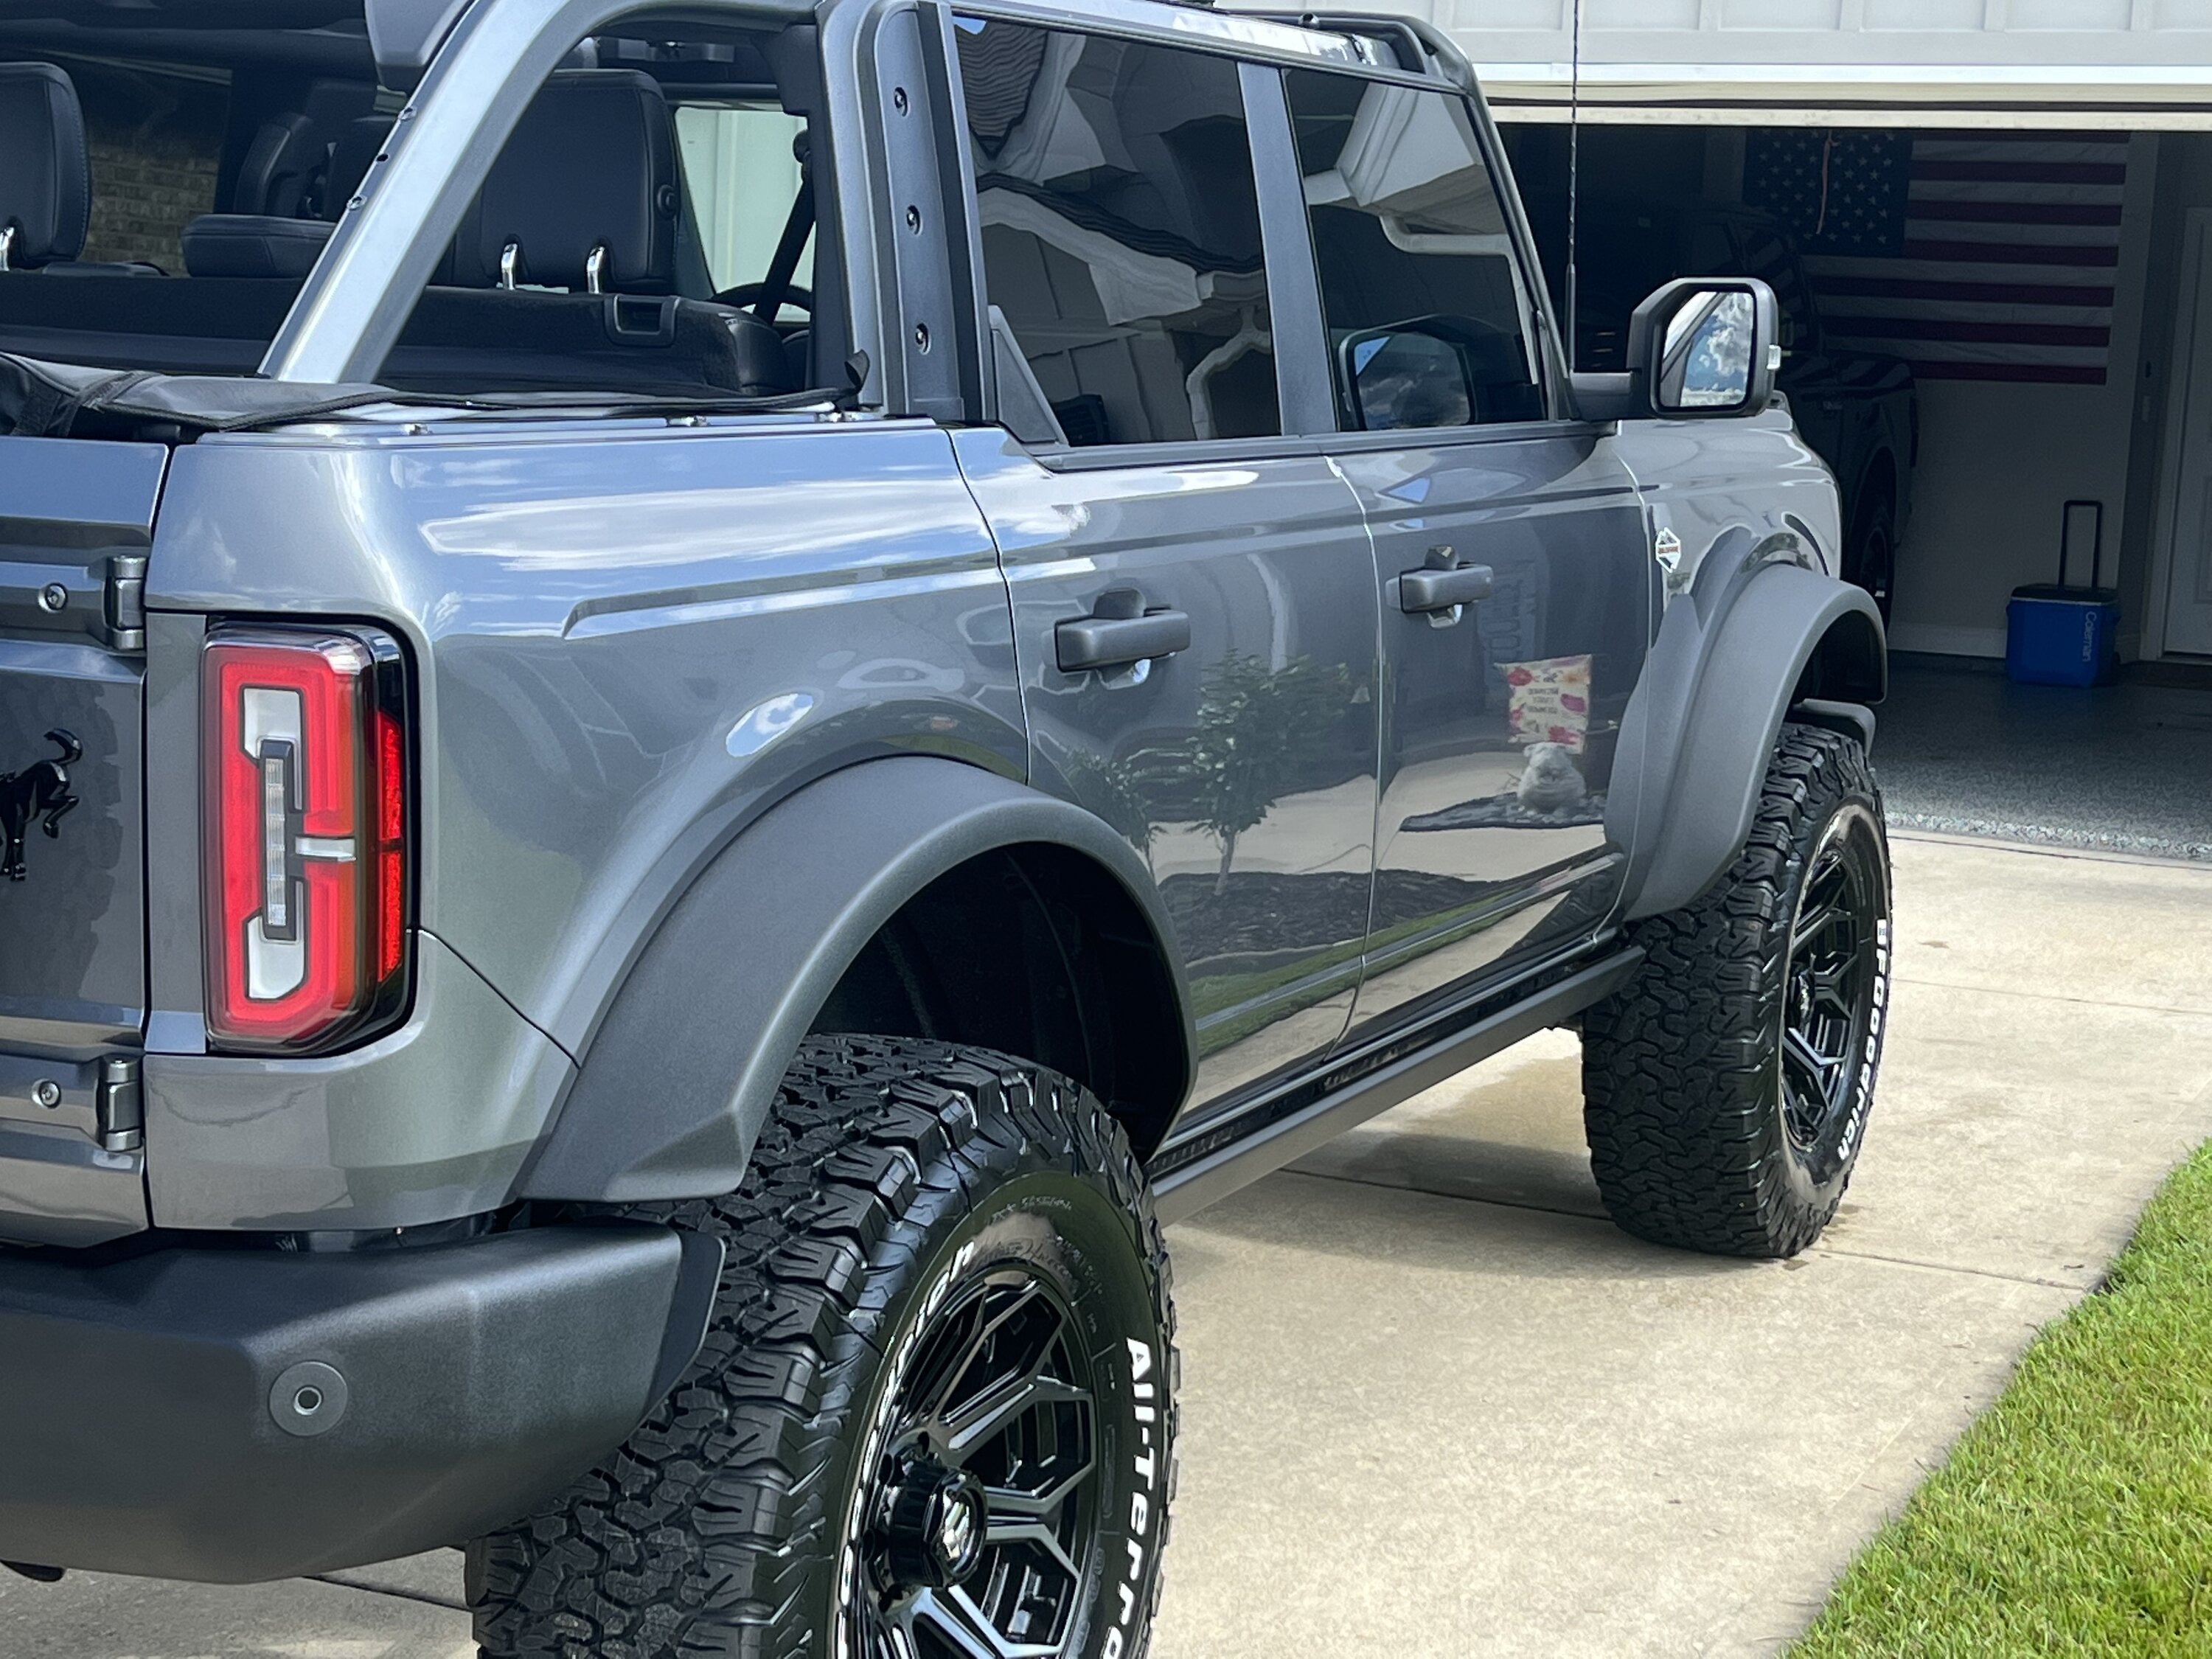 Ford Bronco Show us your installed wheel / tire upgrades here! (Pics) 5D54485B-85D8-4550-8A41-4940335EFC35